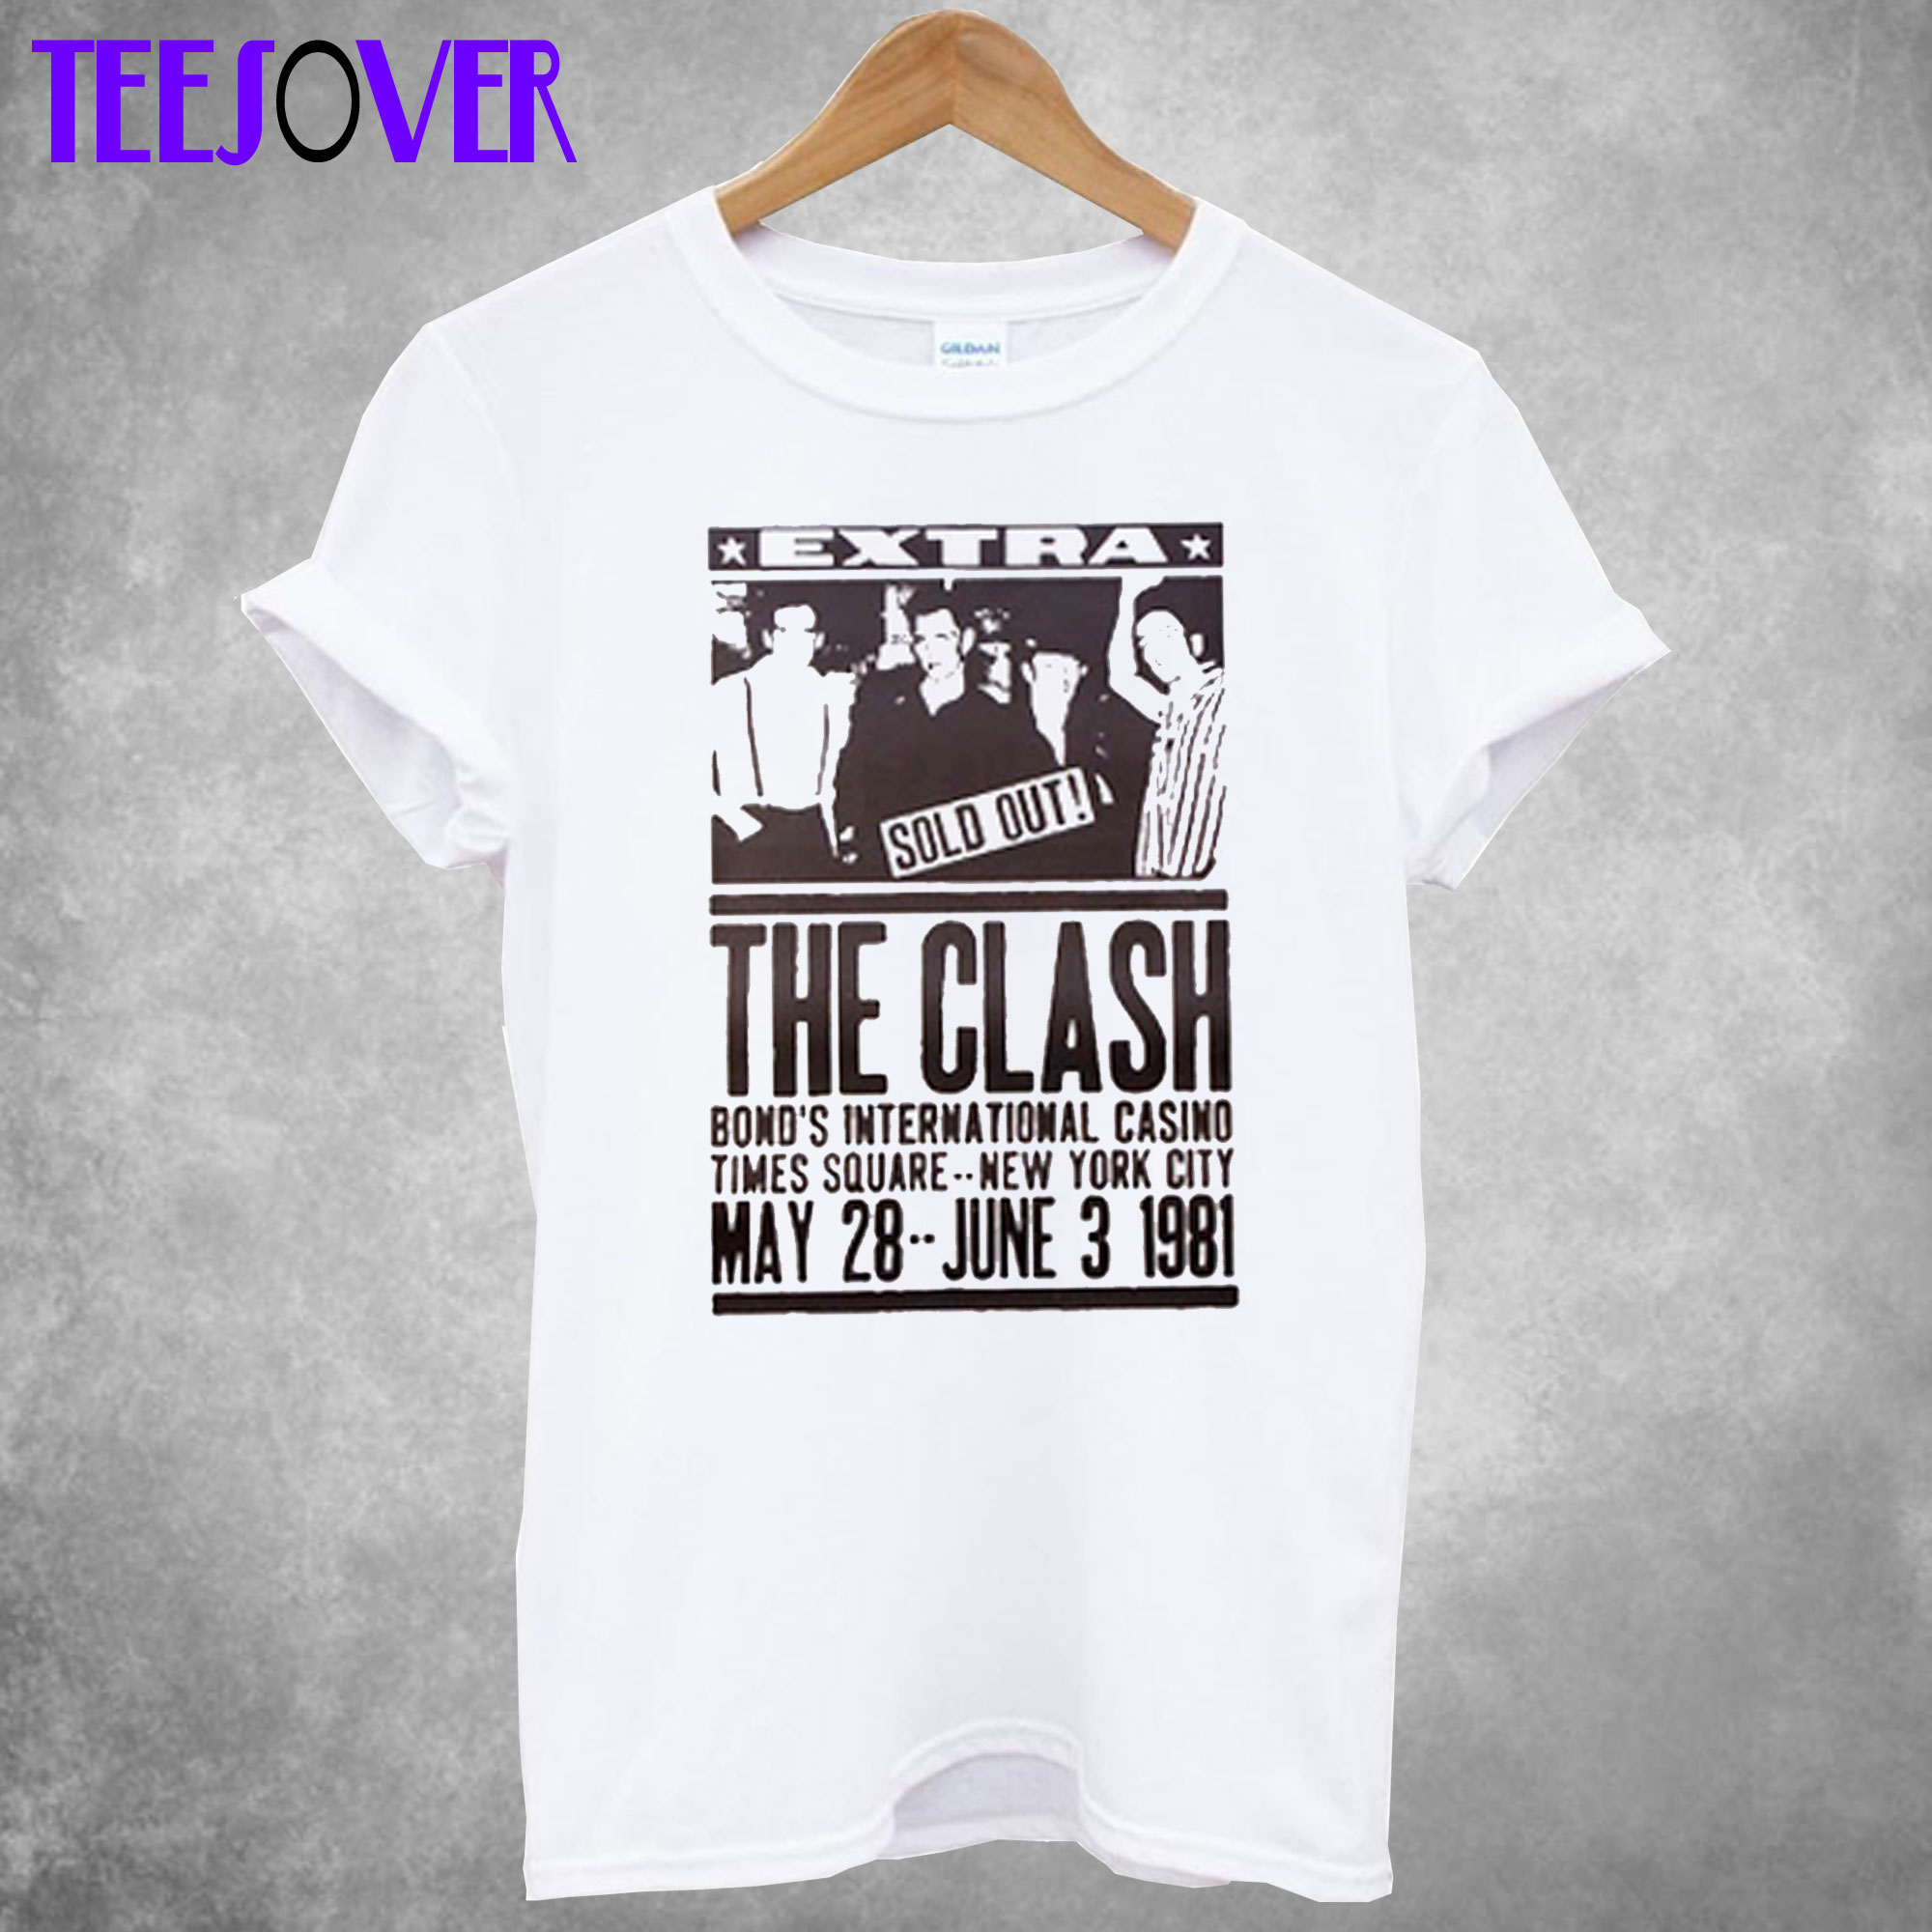 The Clash 1981 Poster T-Shirt